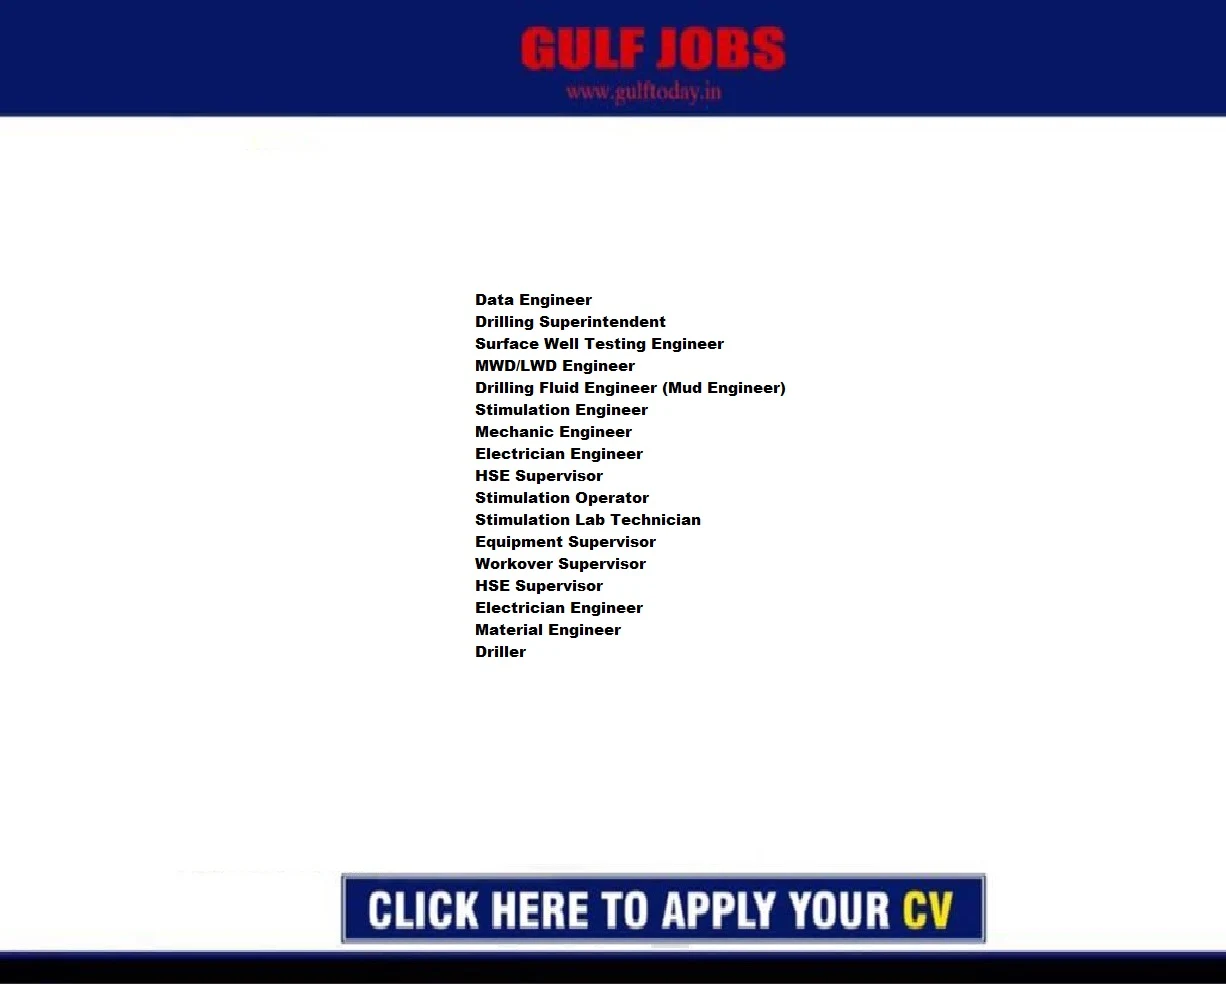 Middle East Jobs-Senior Completion Tool Operator-Senior Tool Pusher-Tool Pusher-Assistant Driller-Data Engineer-HSE Supervisor-Equipment Supervisor-Workover Supervisor-Material Engineer-Open Hole Chief Operator